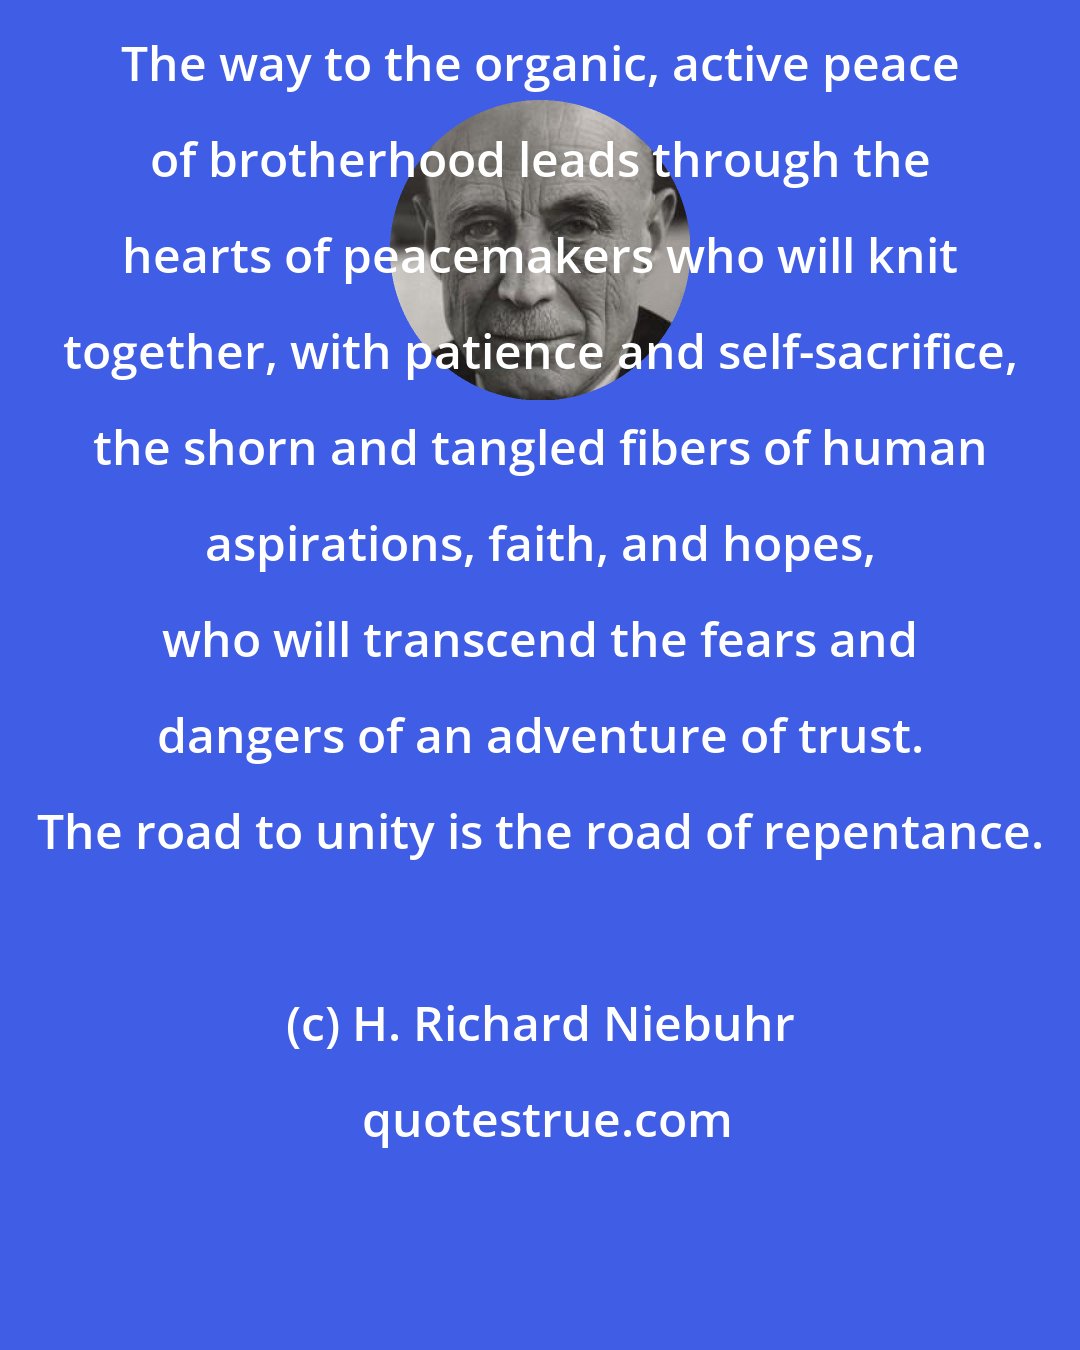 H. Richard Niebuhr: The way to the organic, active peace of brotherhood leads through the hearts of peacemakers who will knit together, with patience and self-sacrifice, the shorn and tangled fibers of human aspirations, faith, and hopes, who will transcend the fears and dangers of an adventure of trust. The road to unity is the road of repentance.